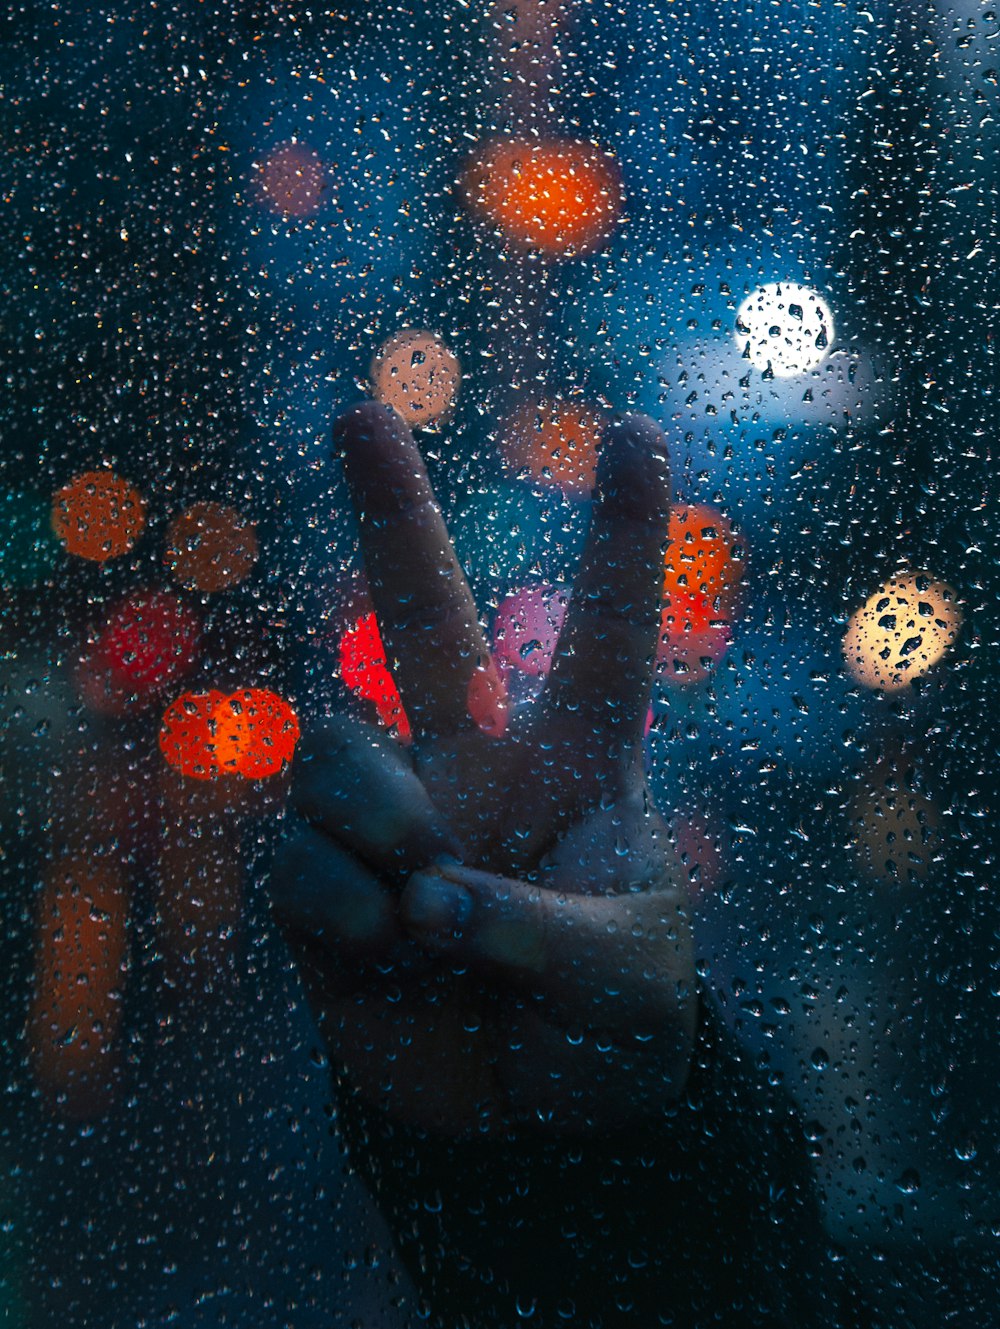 persons hand on glass with water droplets